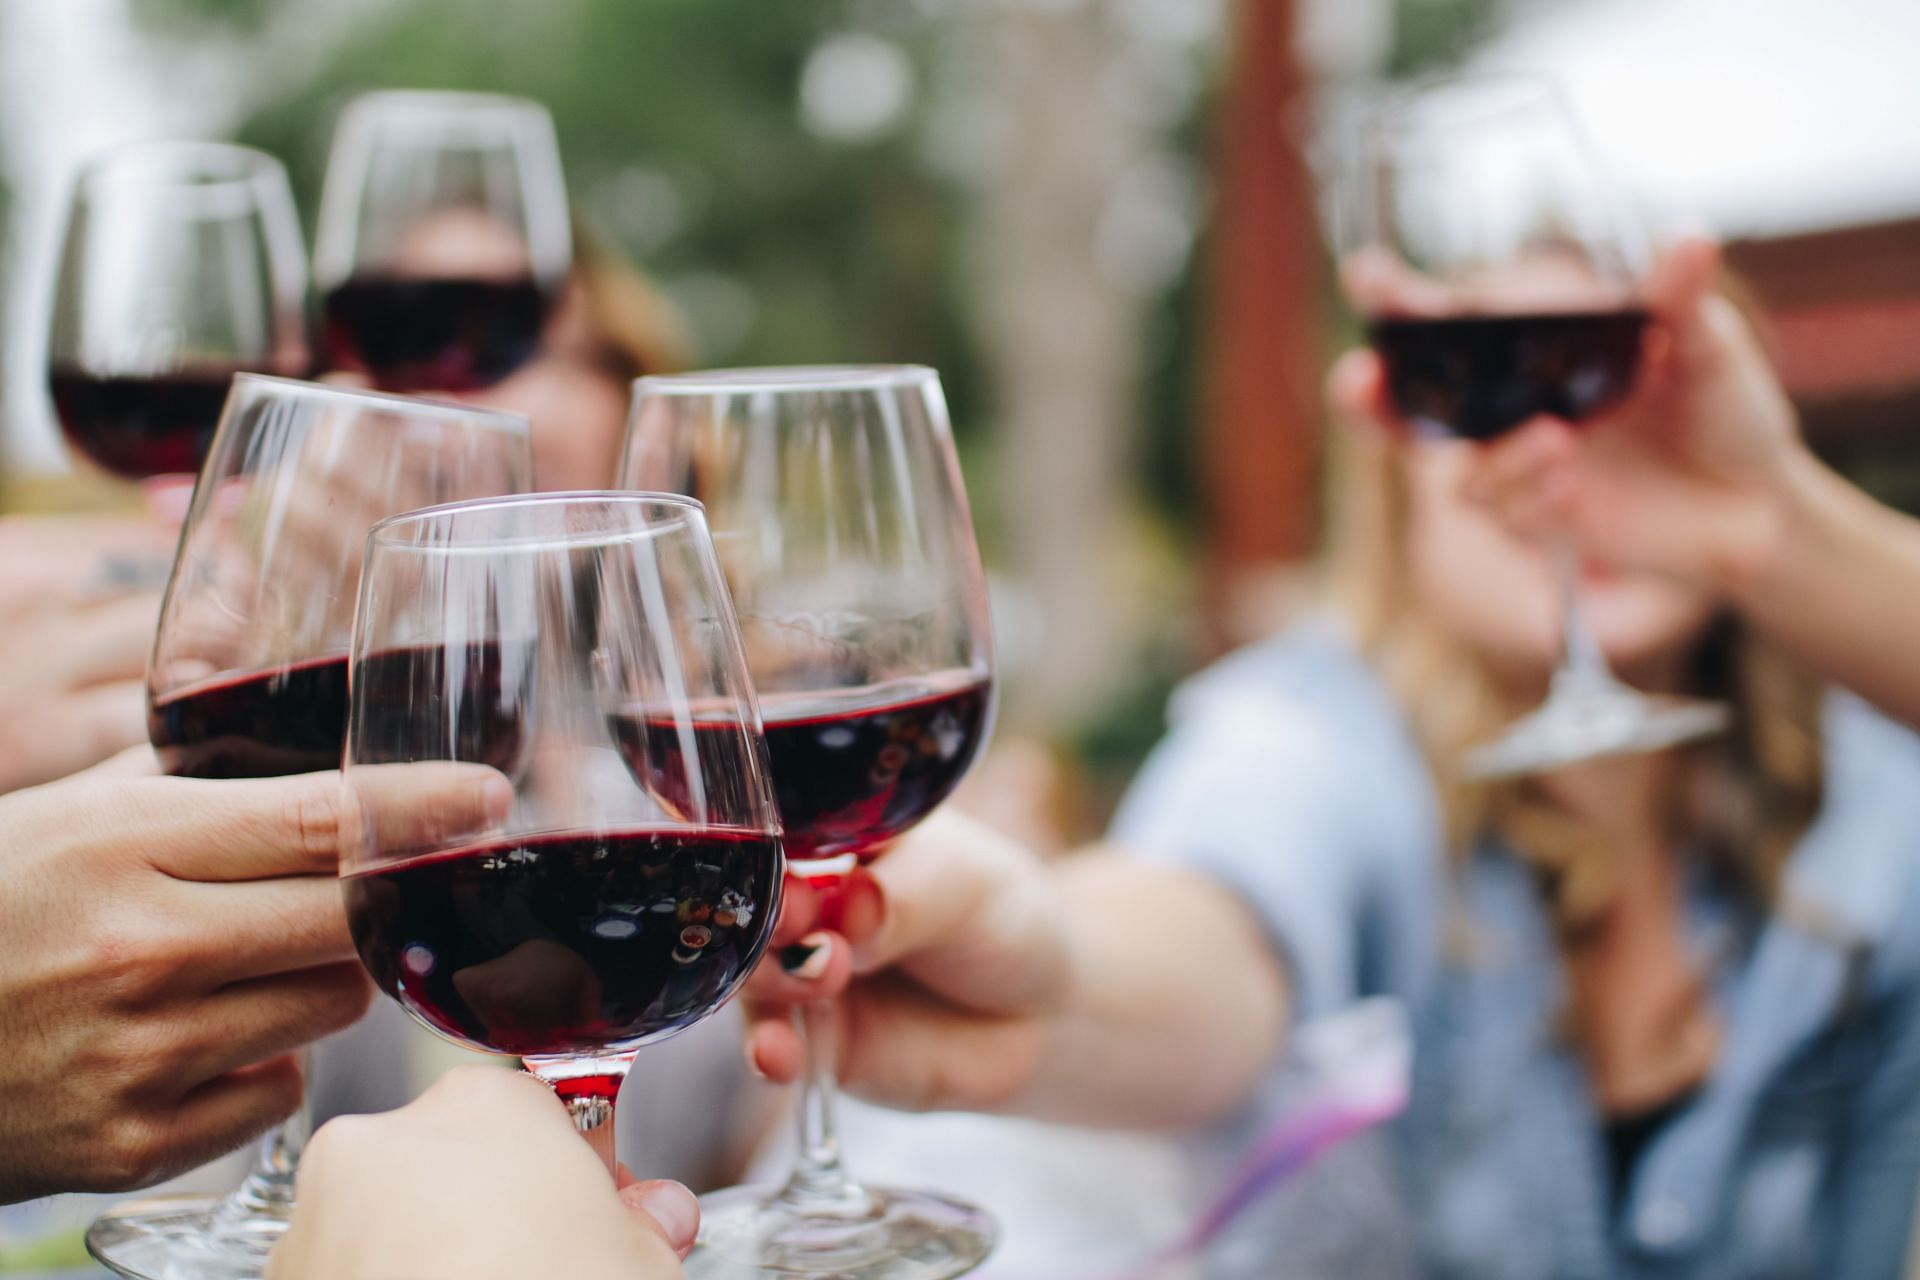 Is Wine good for you? (Image via Unsplash/ Kelsey Knight)